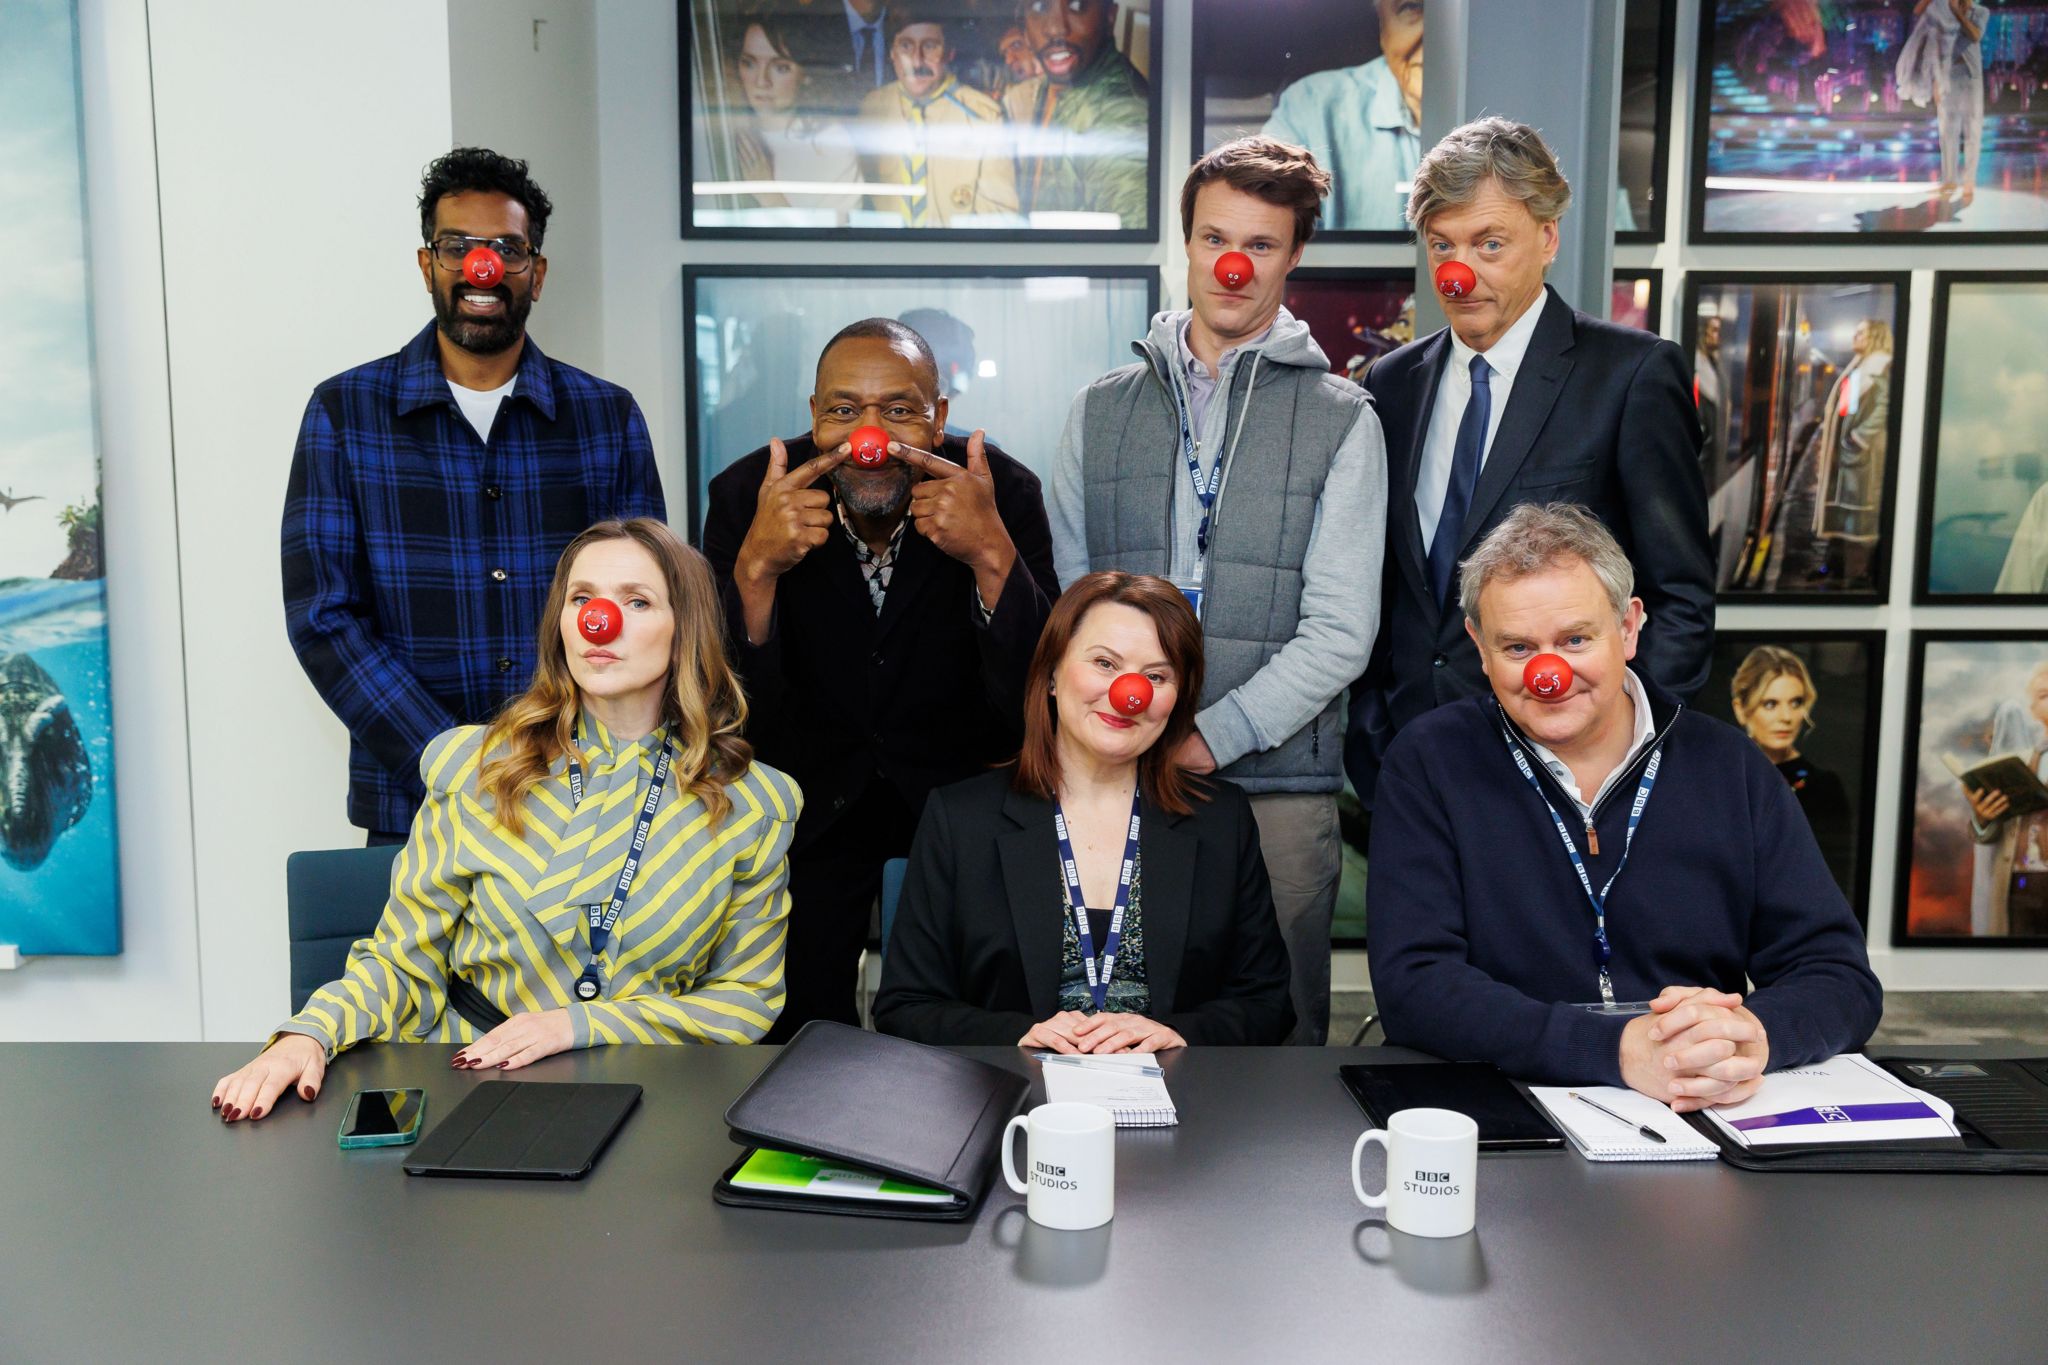 W1A cast with Sir Lenny Henry in Comic Relief sketch